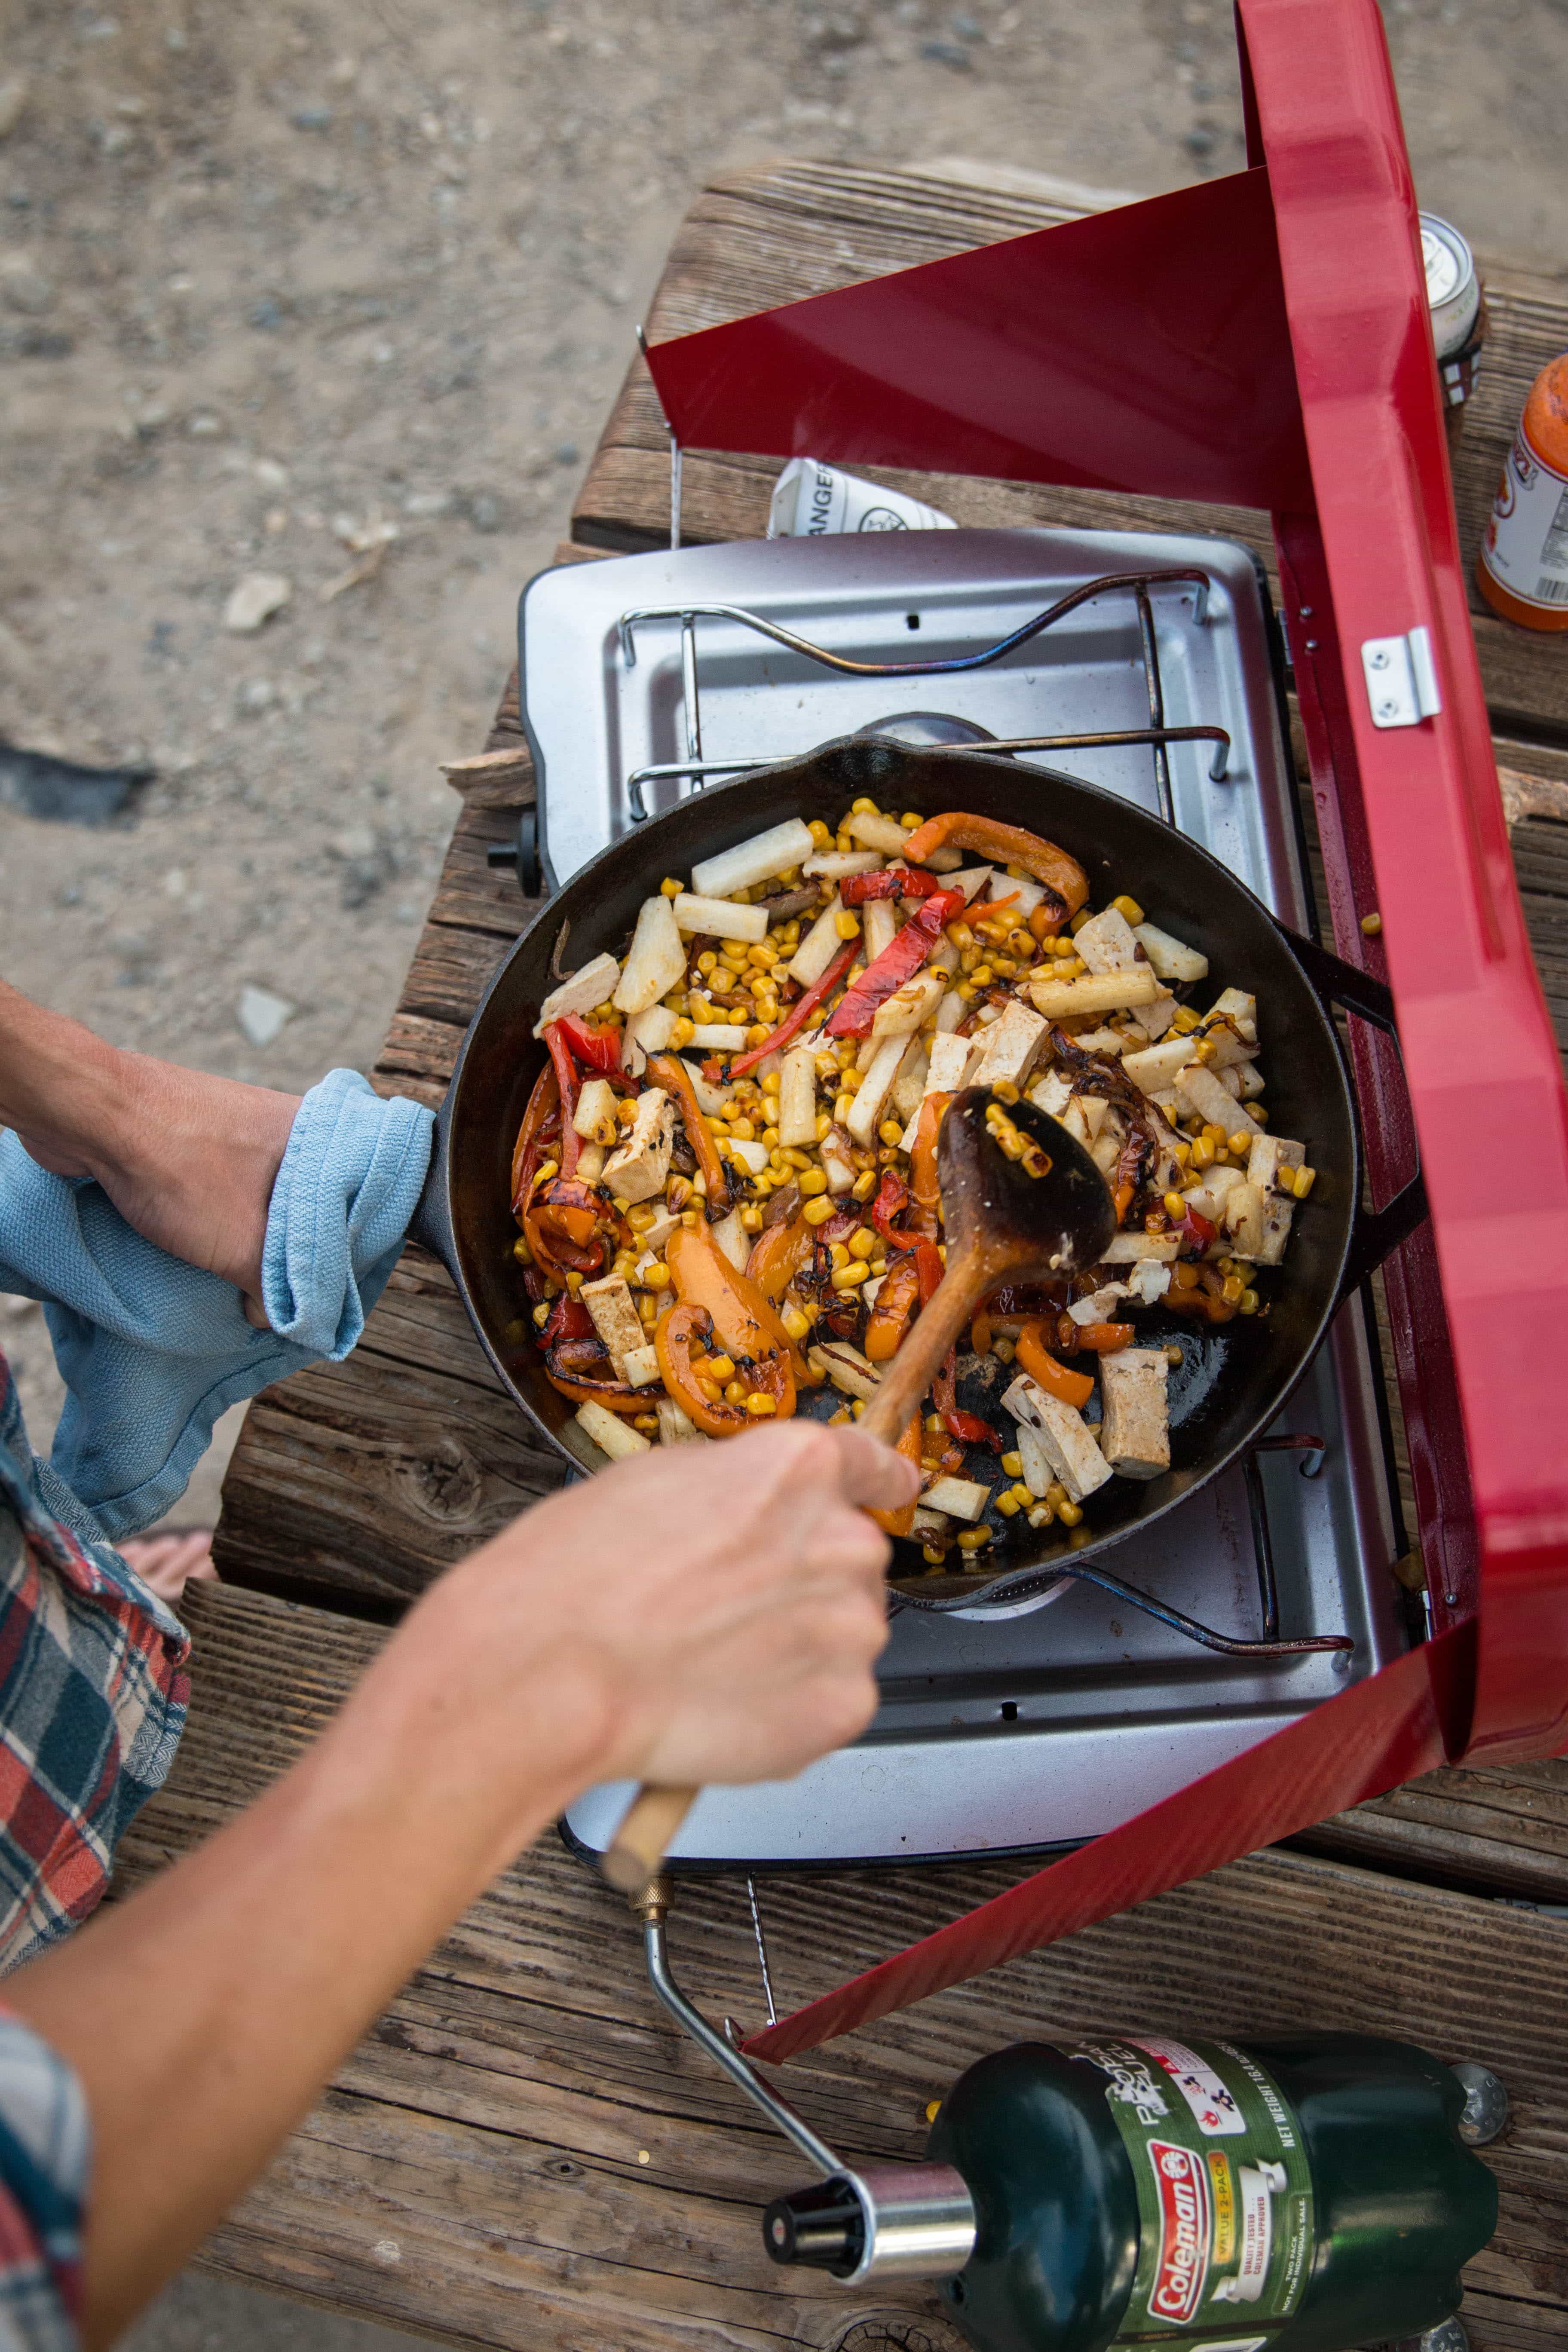 38 Vegan Camping Food Ideas for PlantBased Adventurers